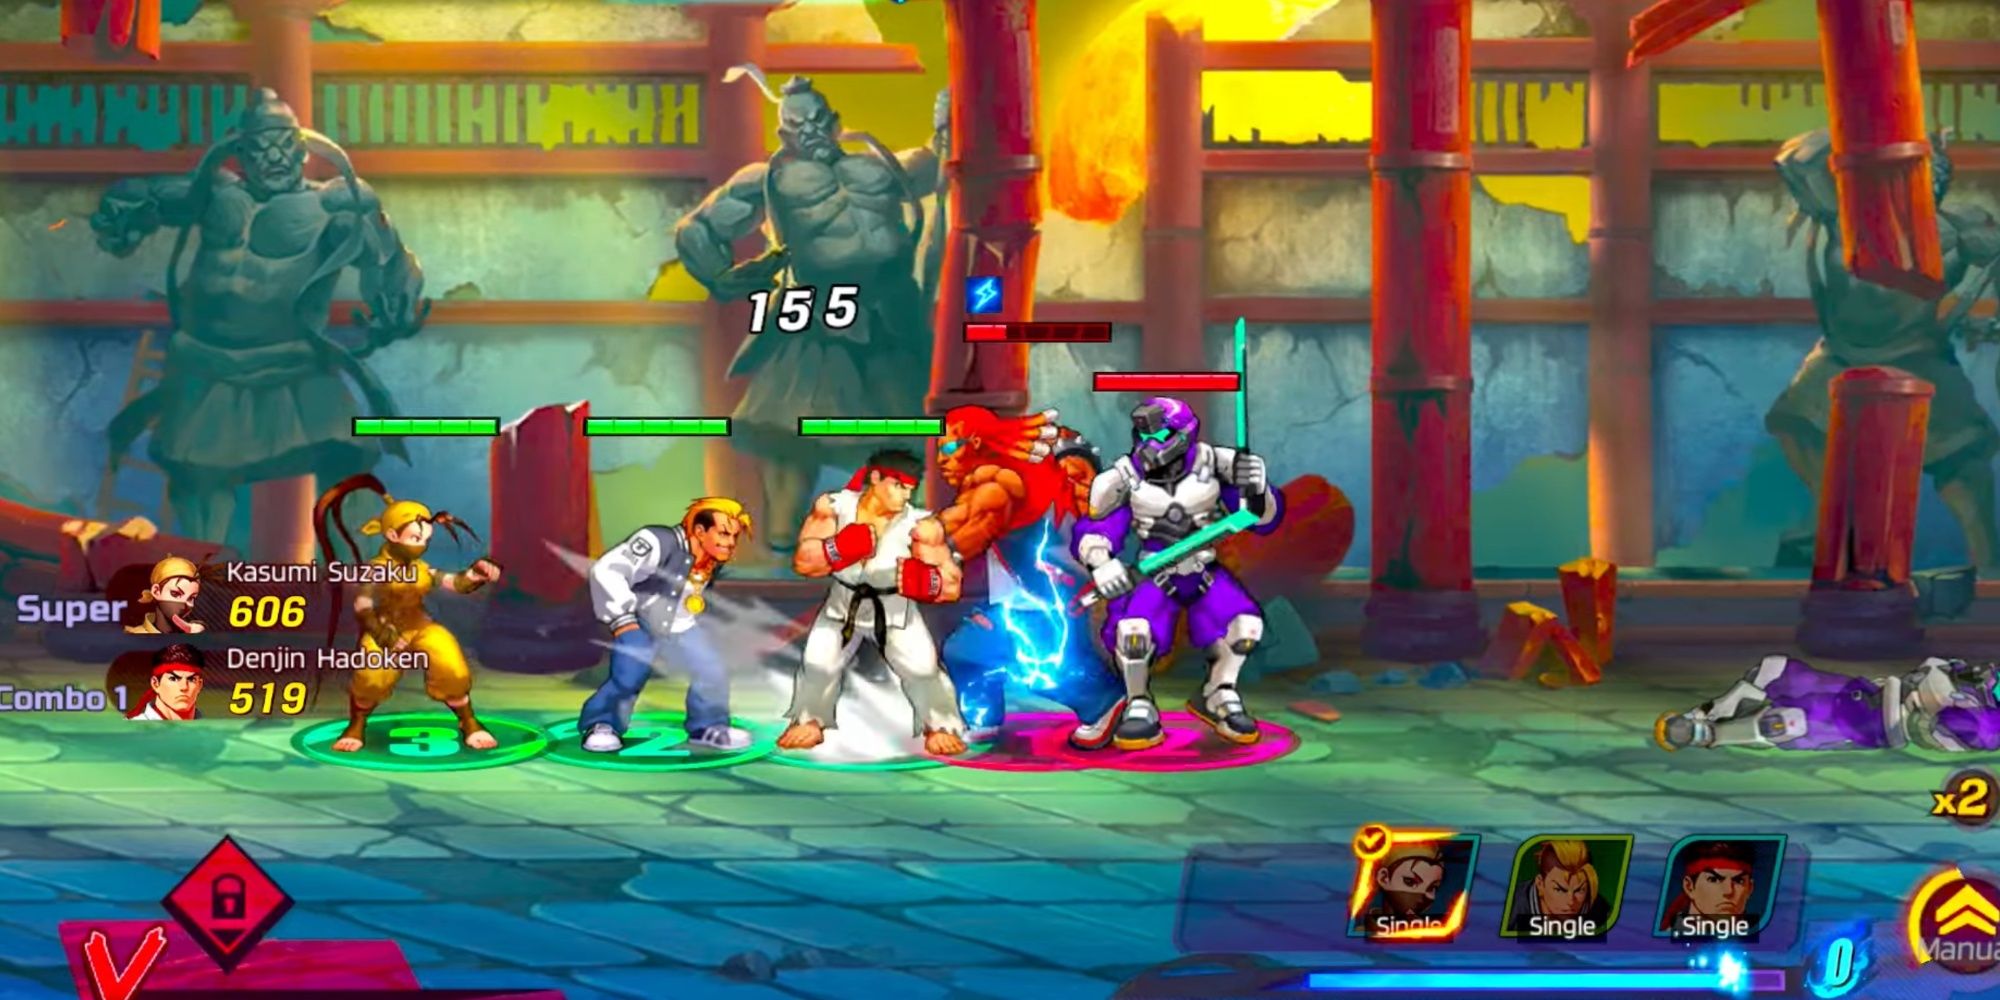 A trio of characters from Street Fighter dueling with opponents in a colorful stage, with abilities being used.